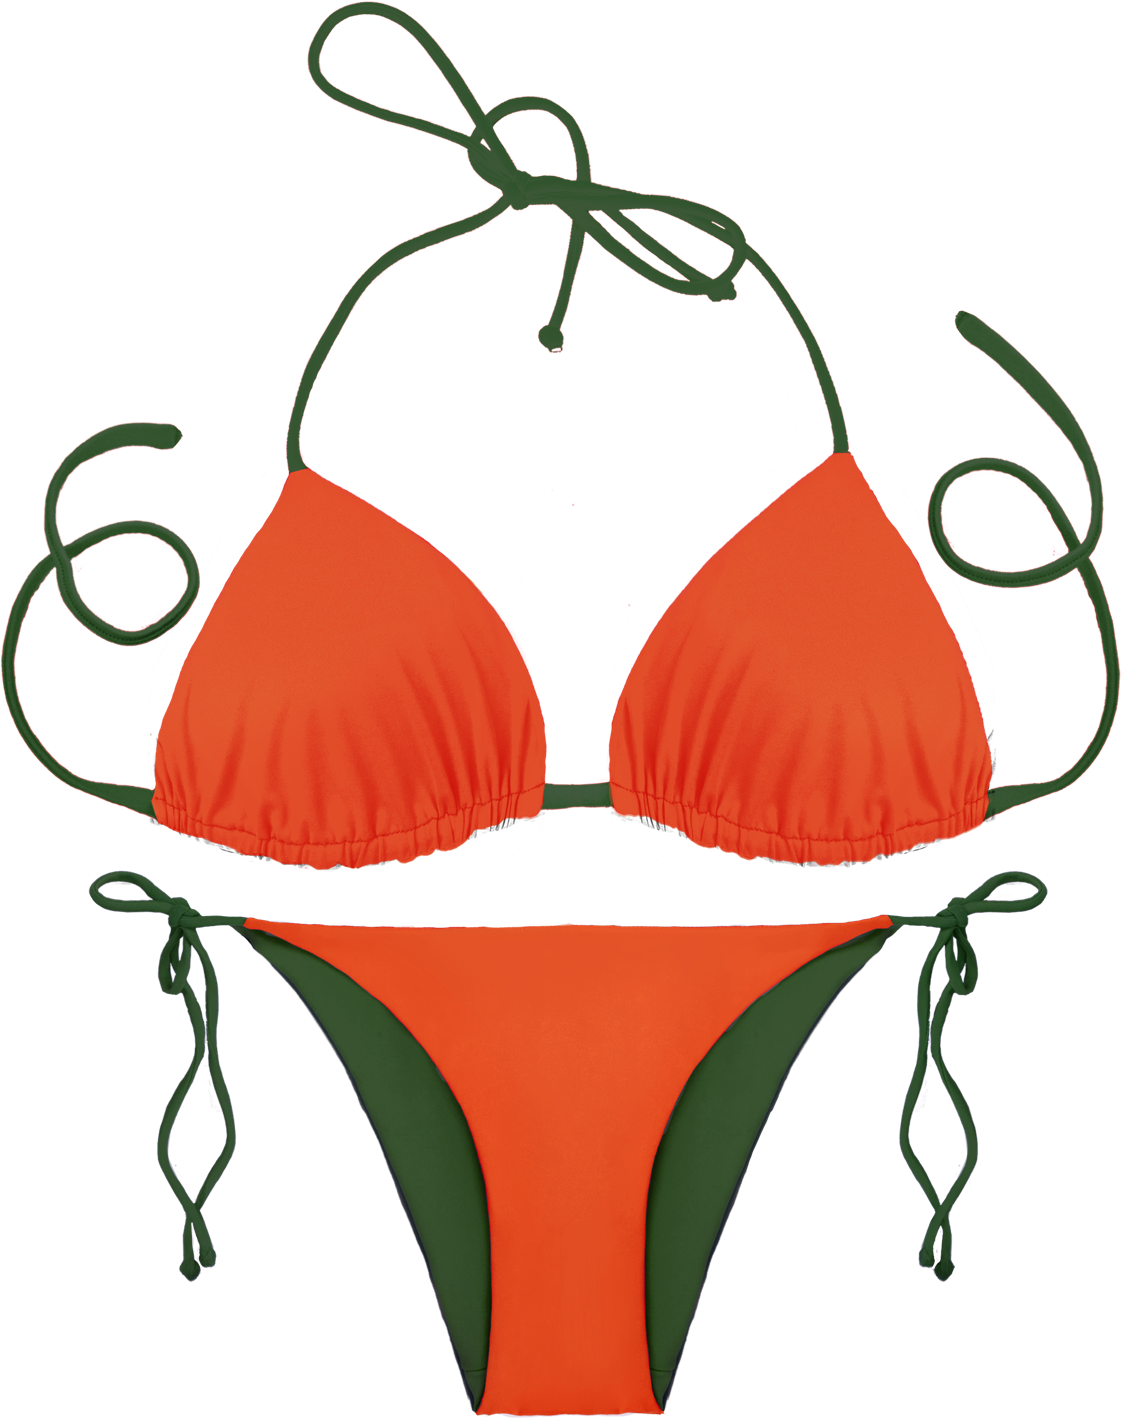 Download and share clipart about Swimsuit, Find more high quality free tran...